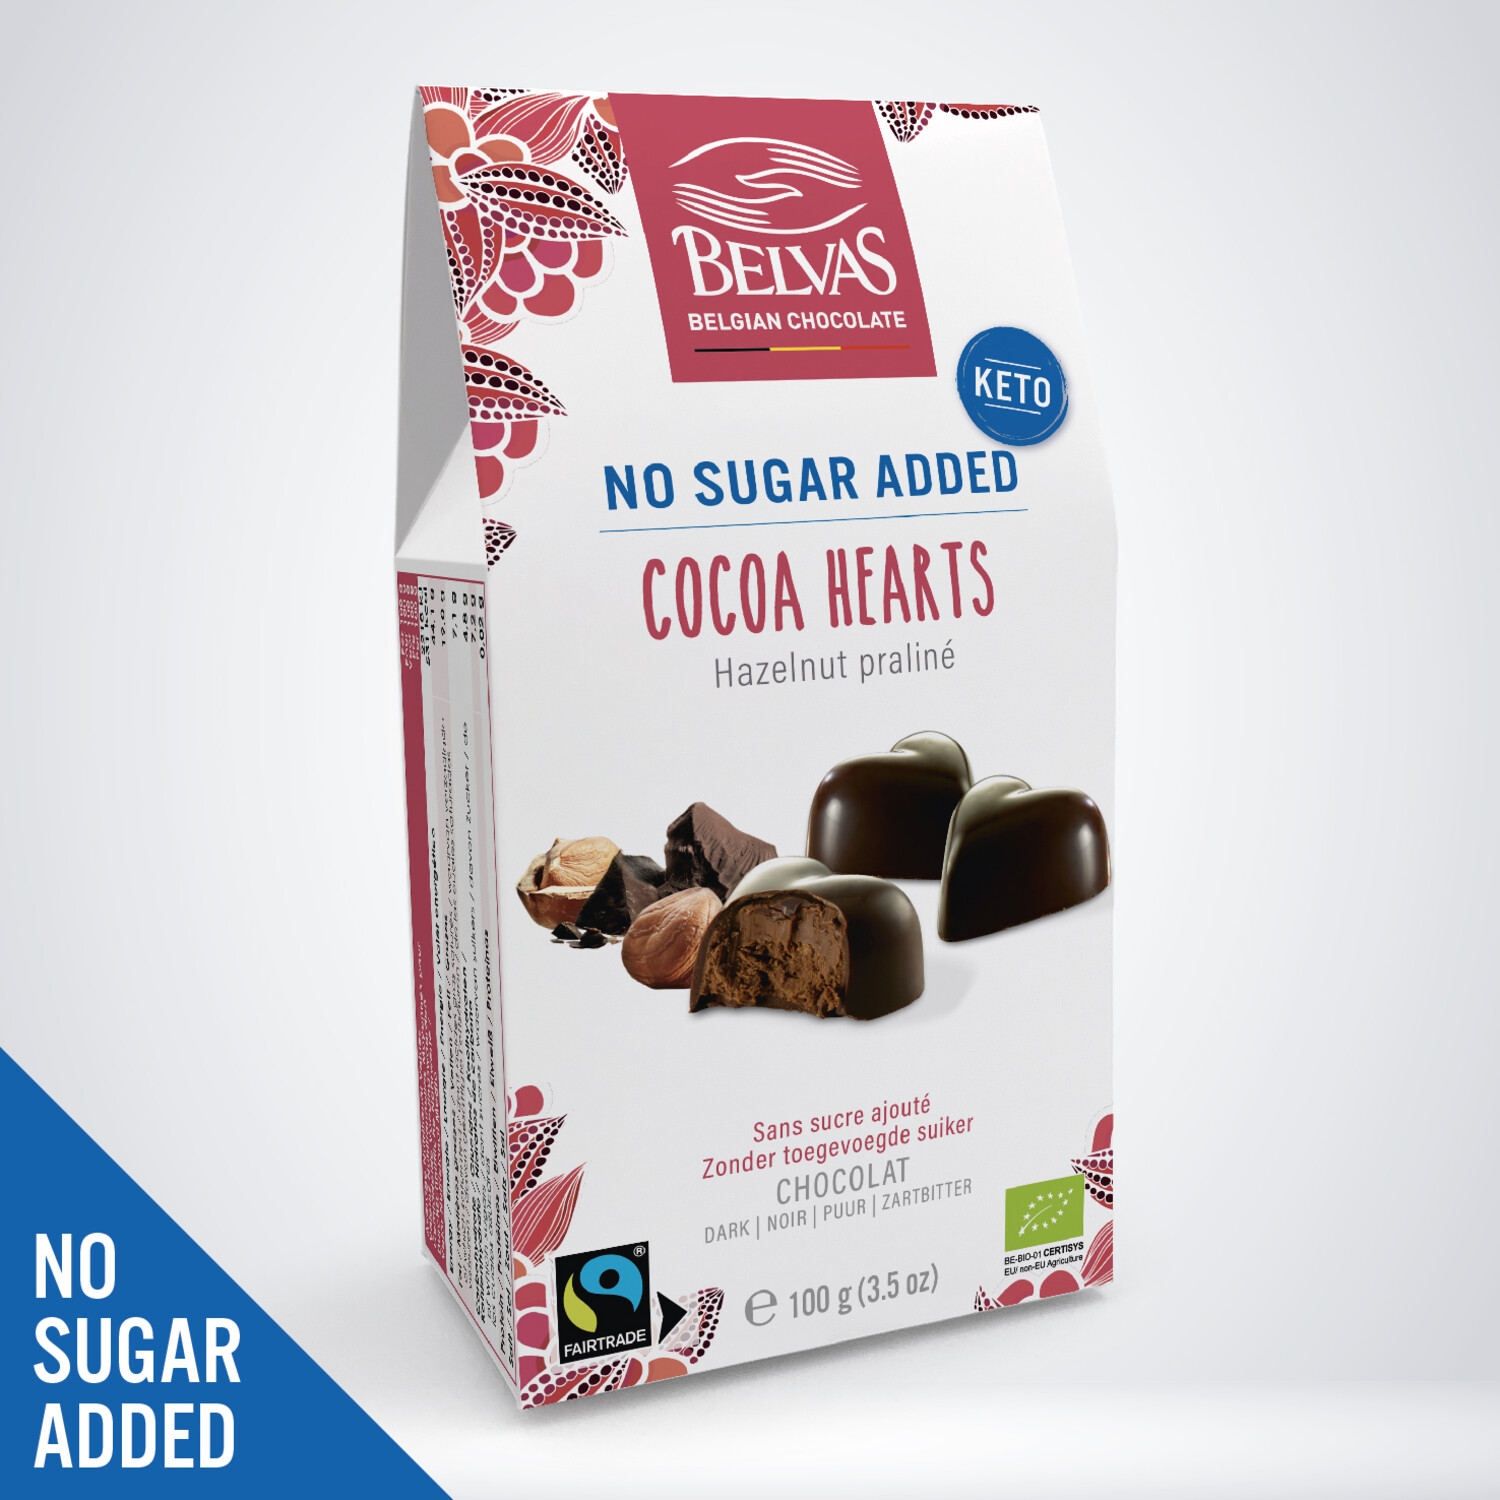 Cocoa hearts with no added sugar – with inulin (100g) PF00187 – Belvas